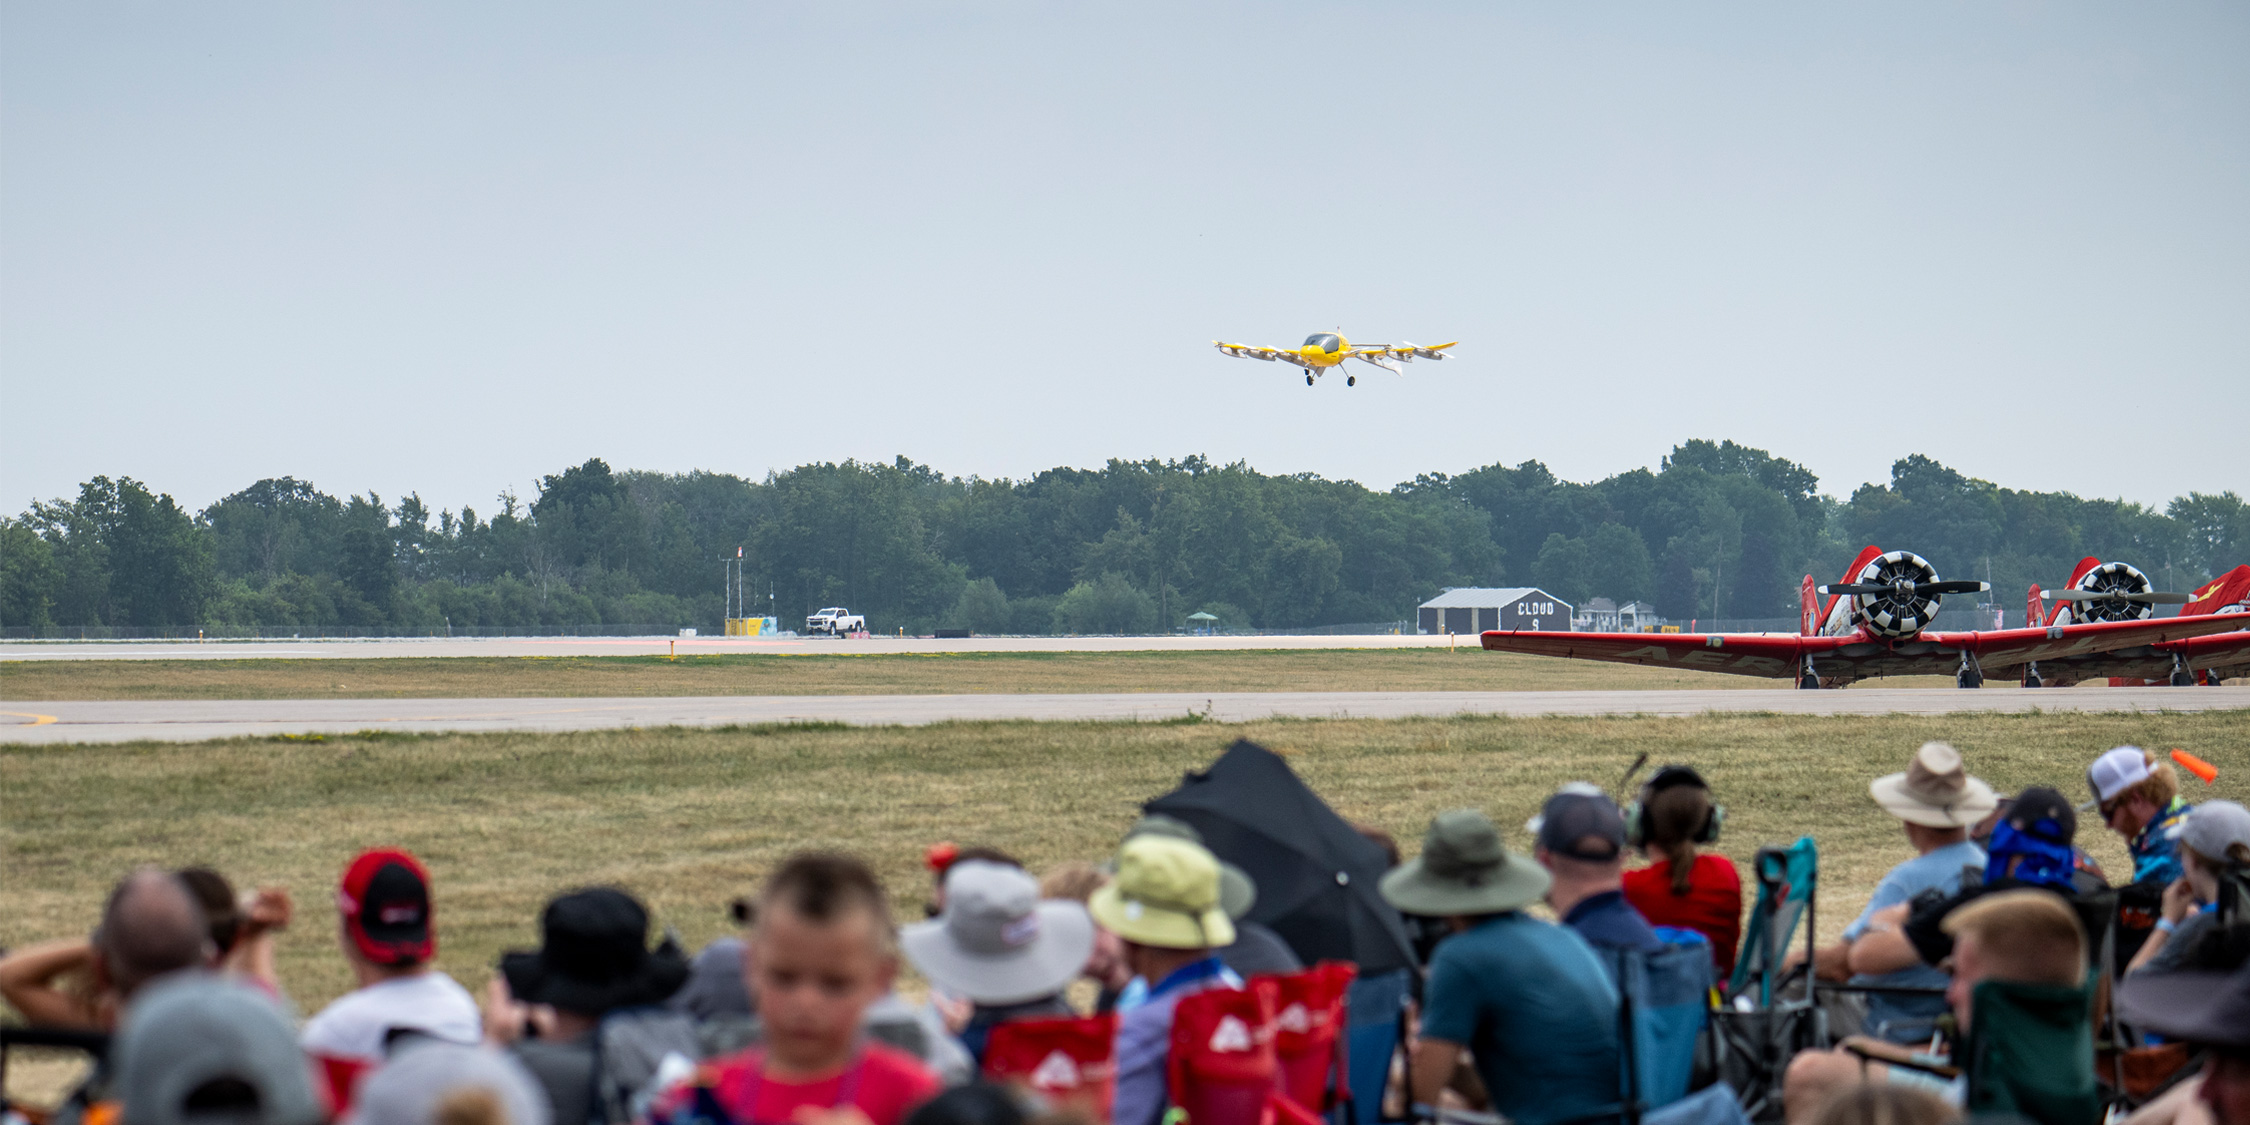 Wisk Aero Completes First-Ever Public Demonstration Flight at EAA AirVenture